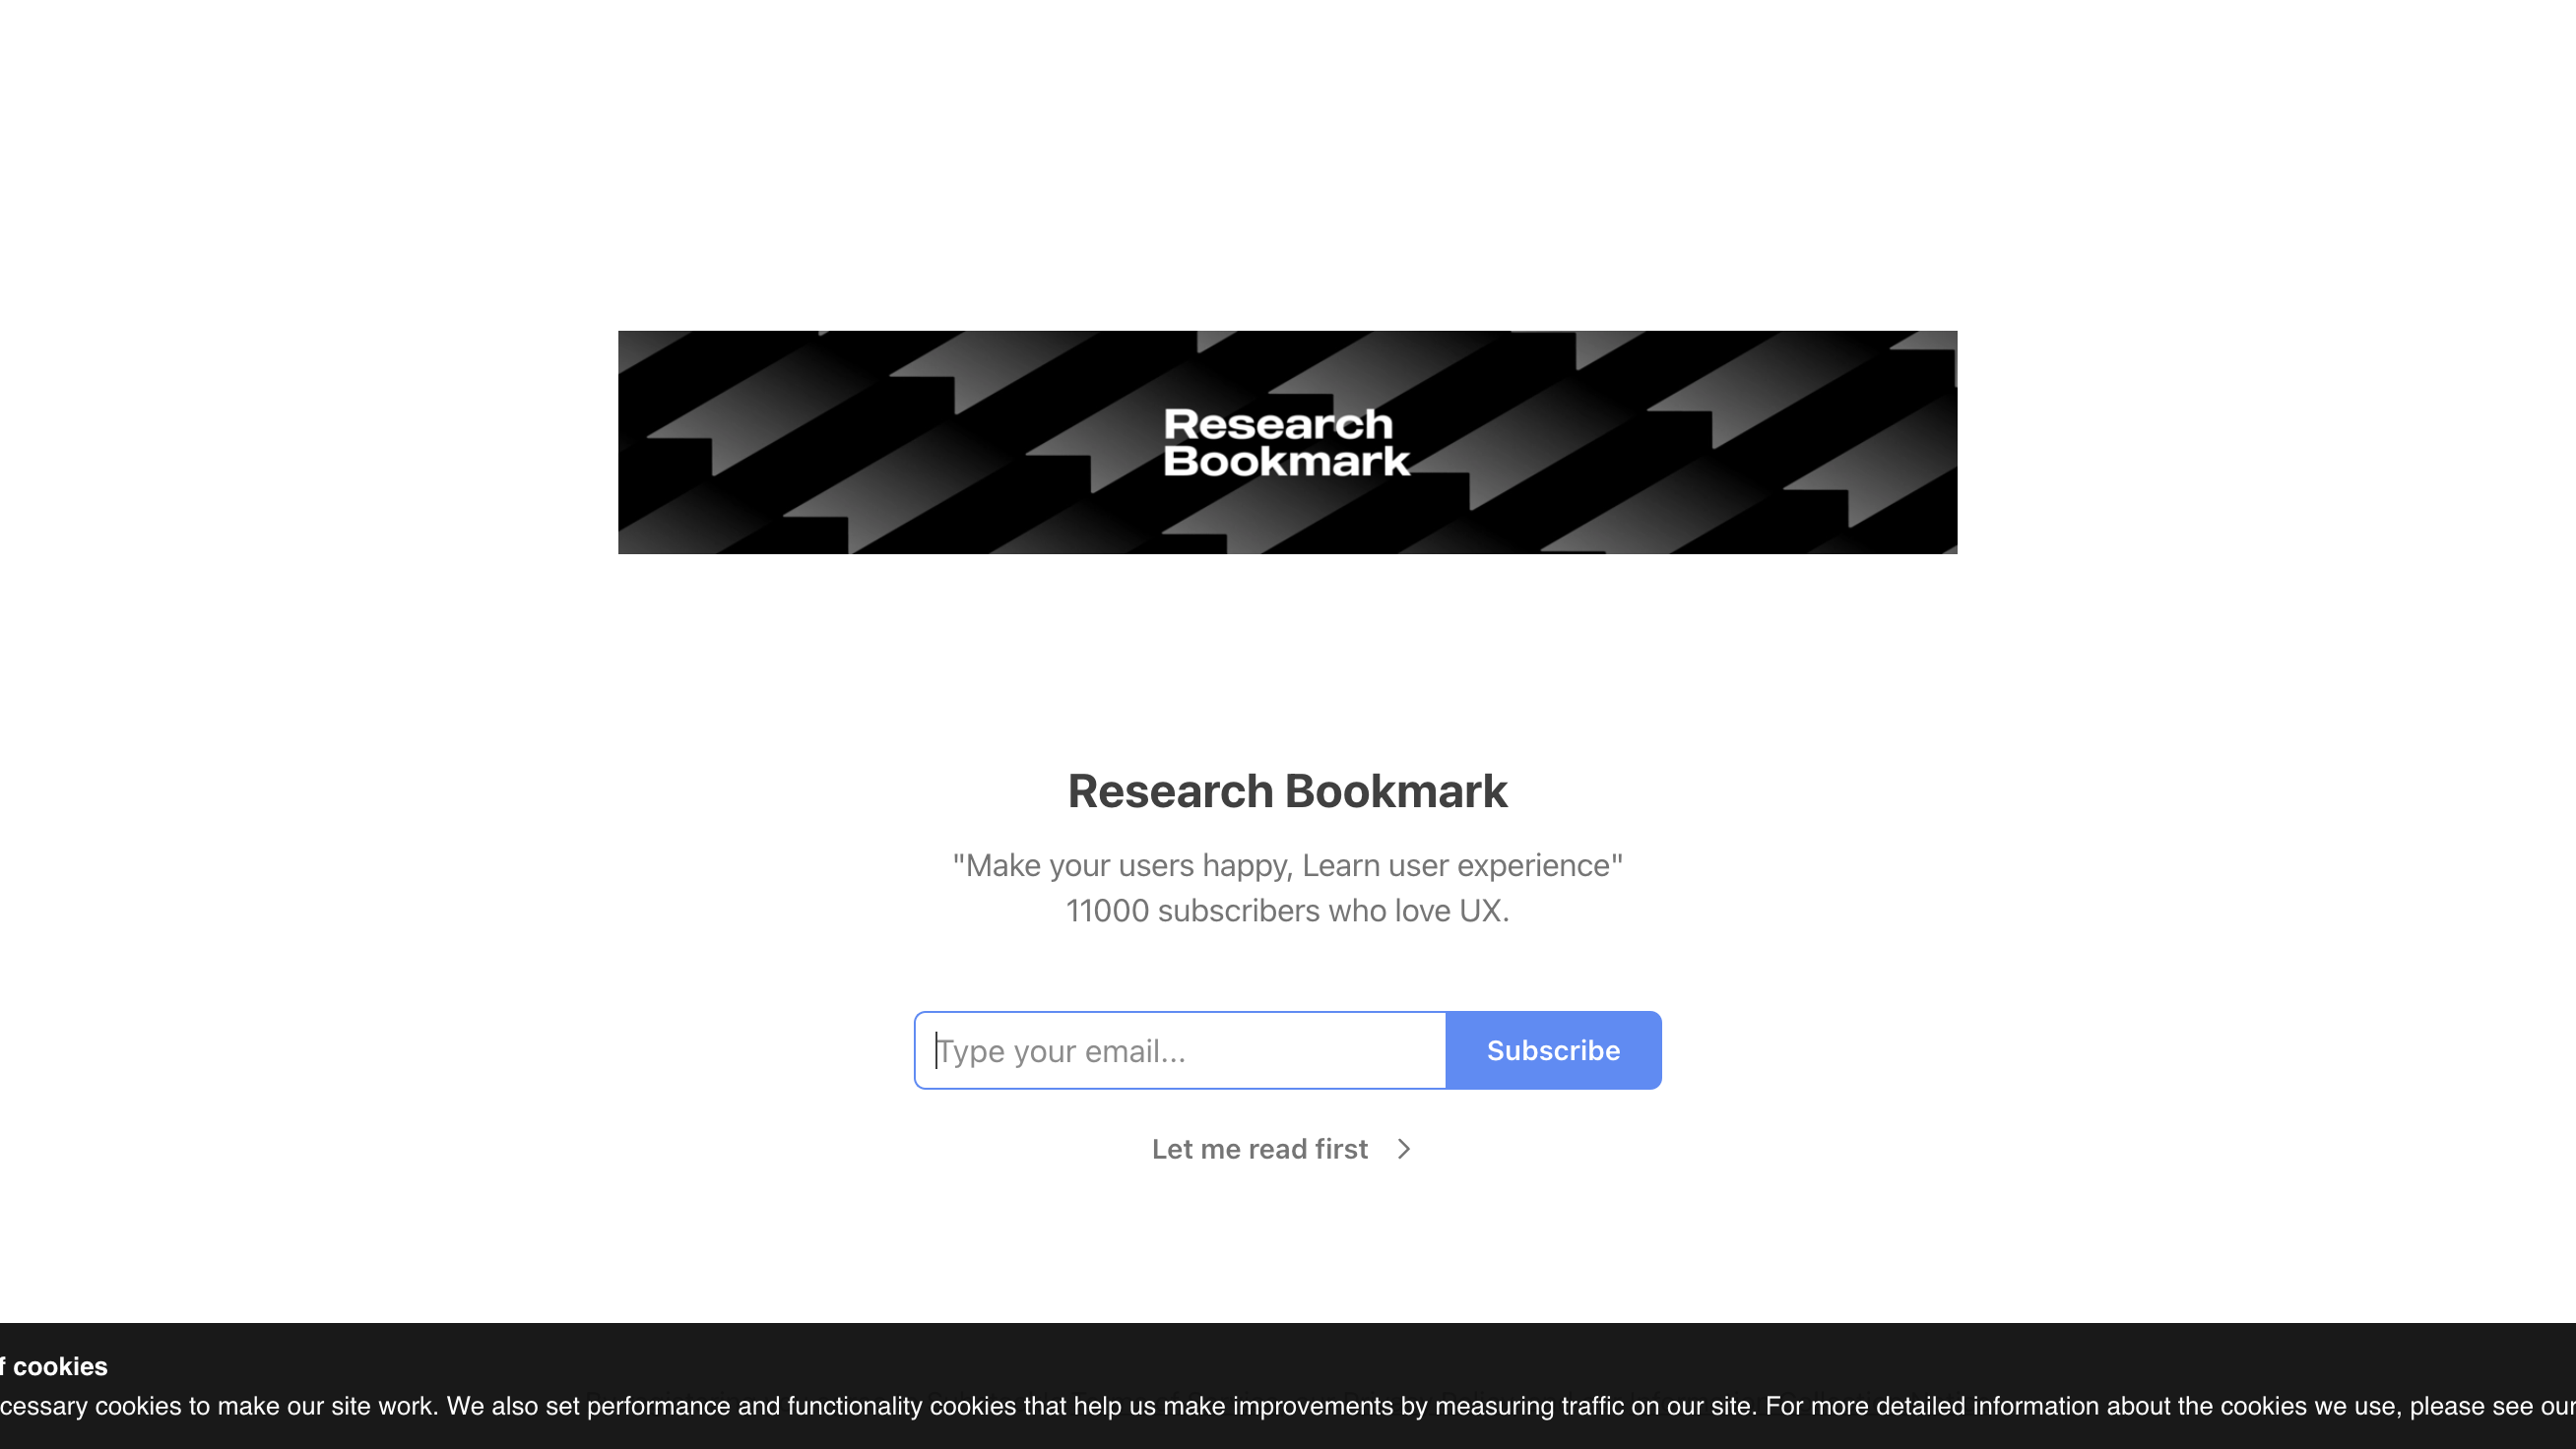 Research Bookmark homepage